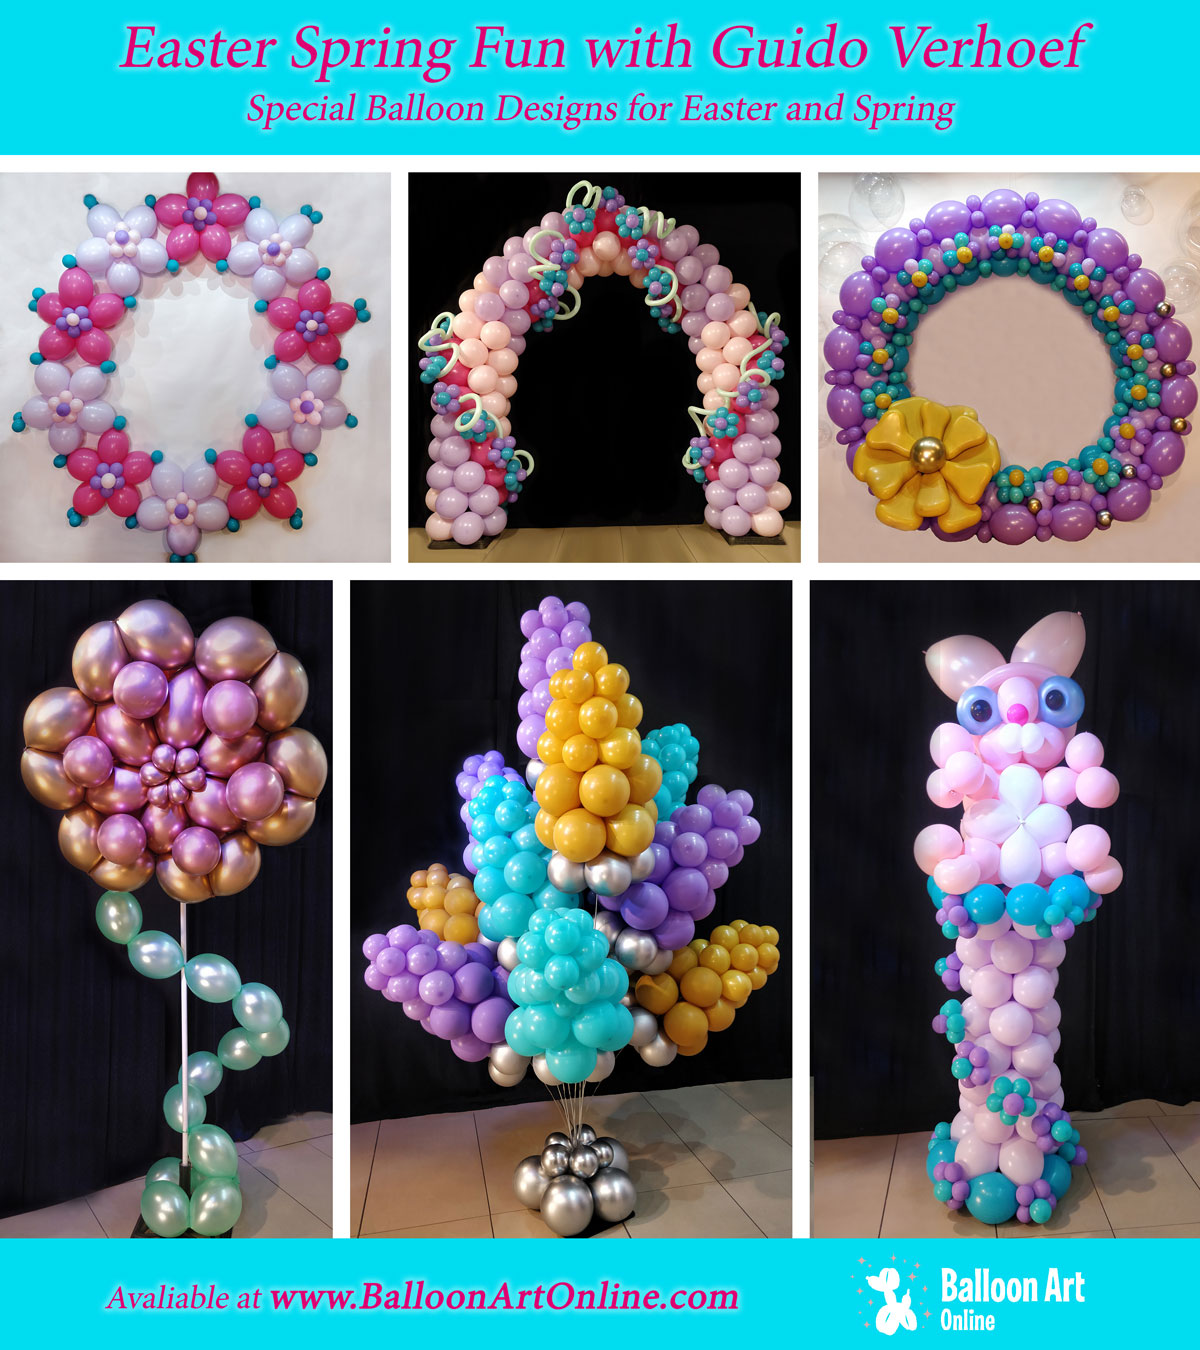 Balloon Designs for Easter